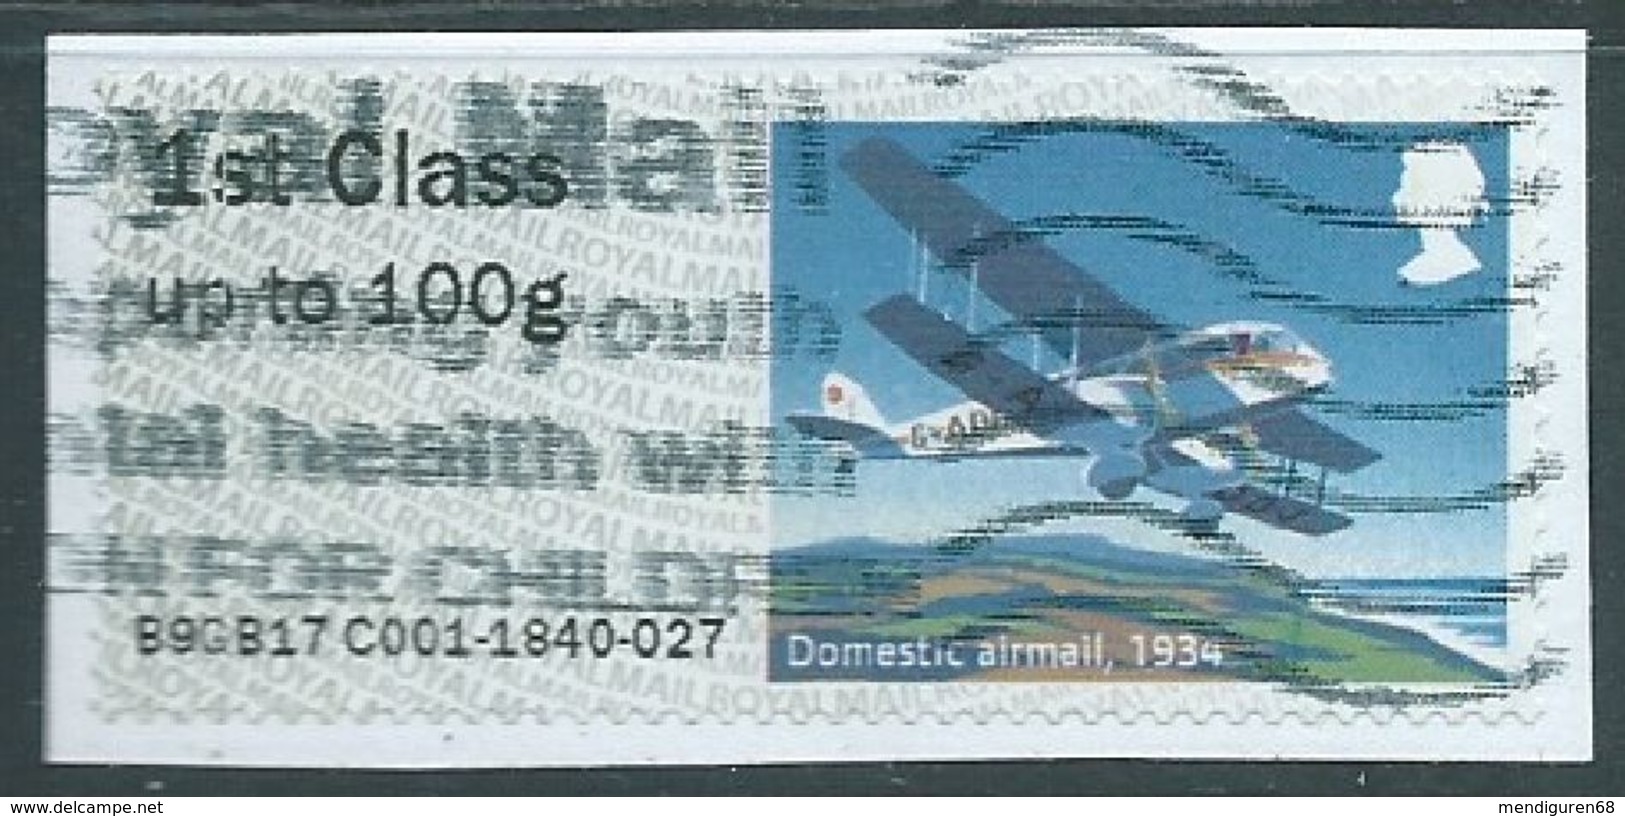 GROSBRITANNIEN GRANDE BRETAGNE GB POST&GO 2017 R.M.HERITAGE MAIL BY AIR: DOMESTIC AIRMAIL1934 FCup To 100g USED SG FS188 - Post & Go (distributeurs)